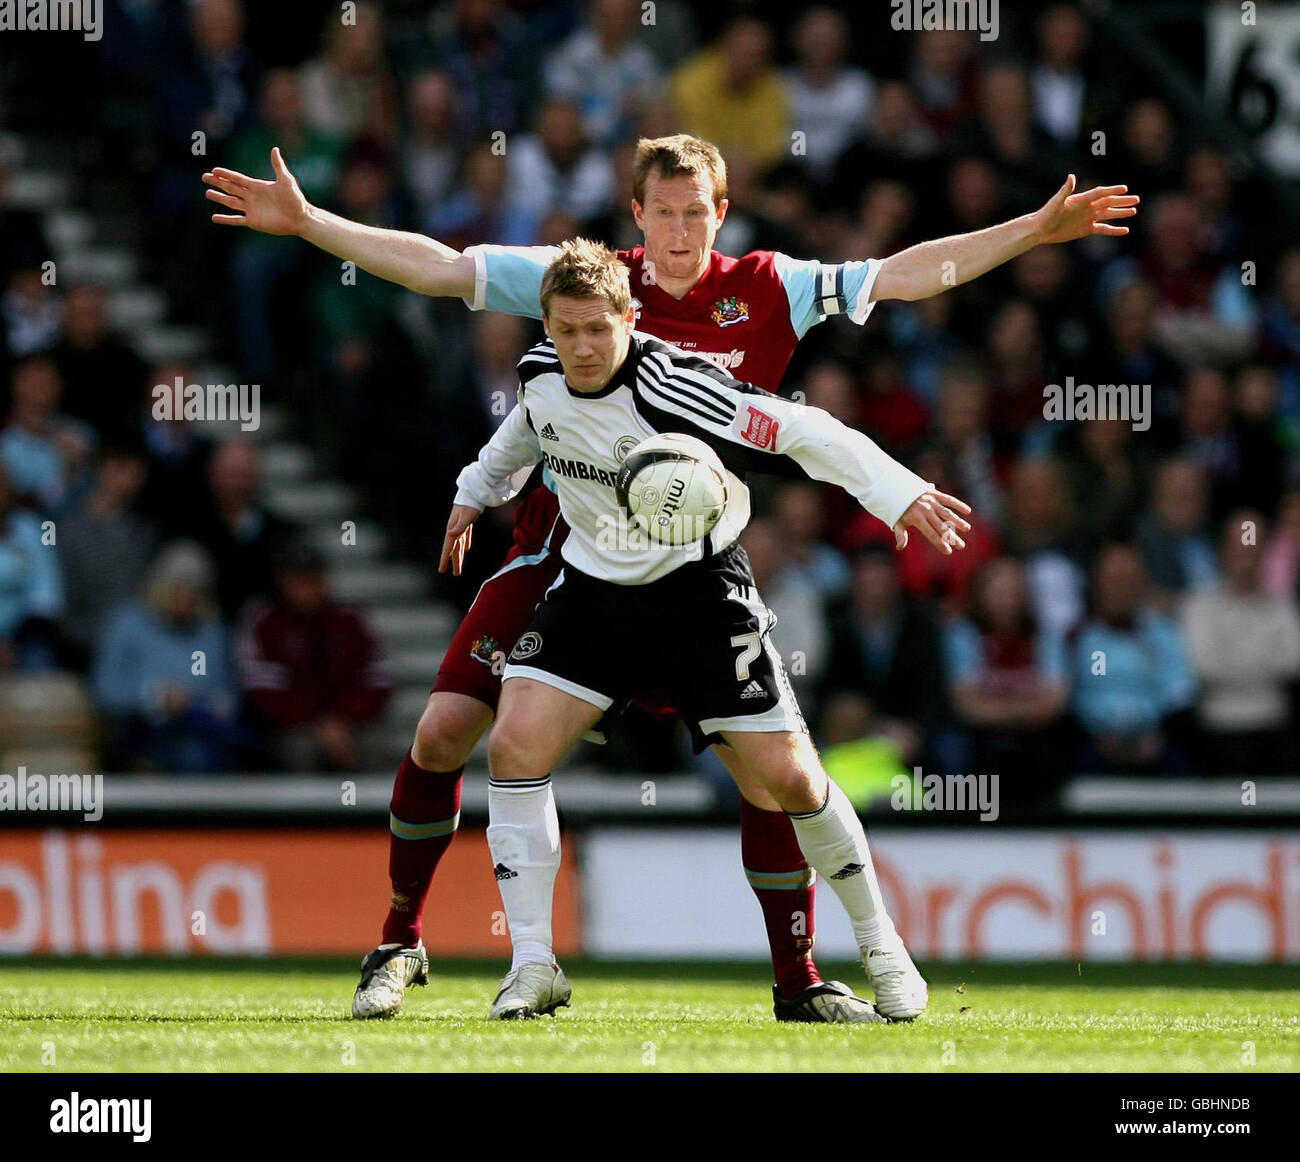 Derby County's Kris Commons (front) and Burnley's Stephen Caldwell (back) battle for the ball during the Coca-Cola Championship match at Pride Park, Derby. Stock Photo